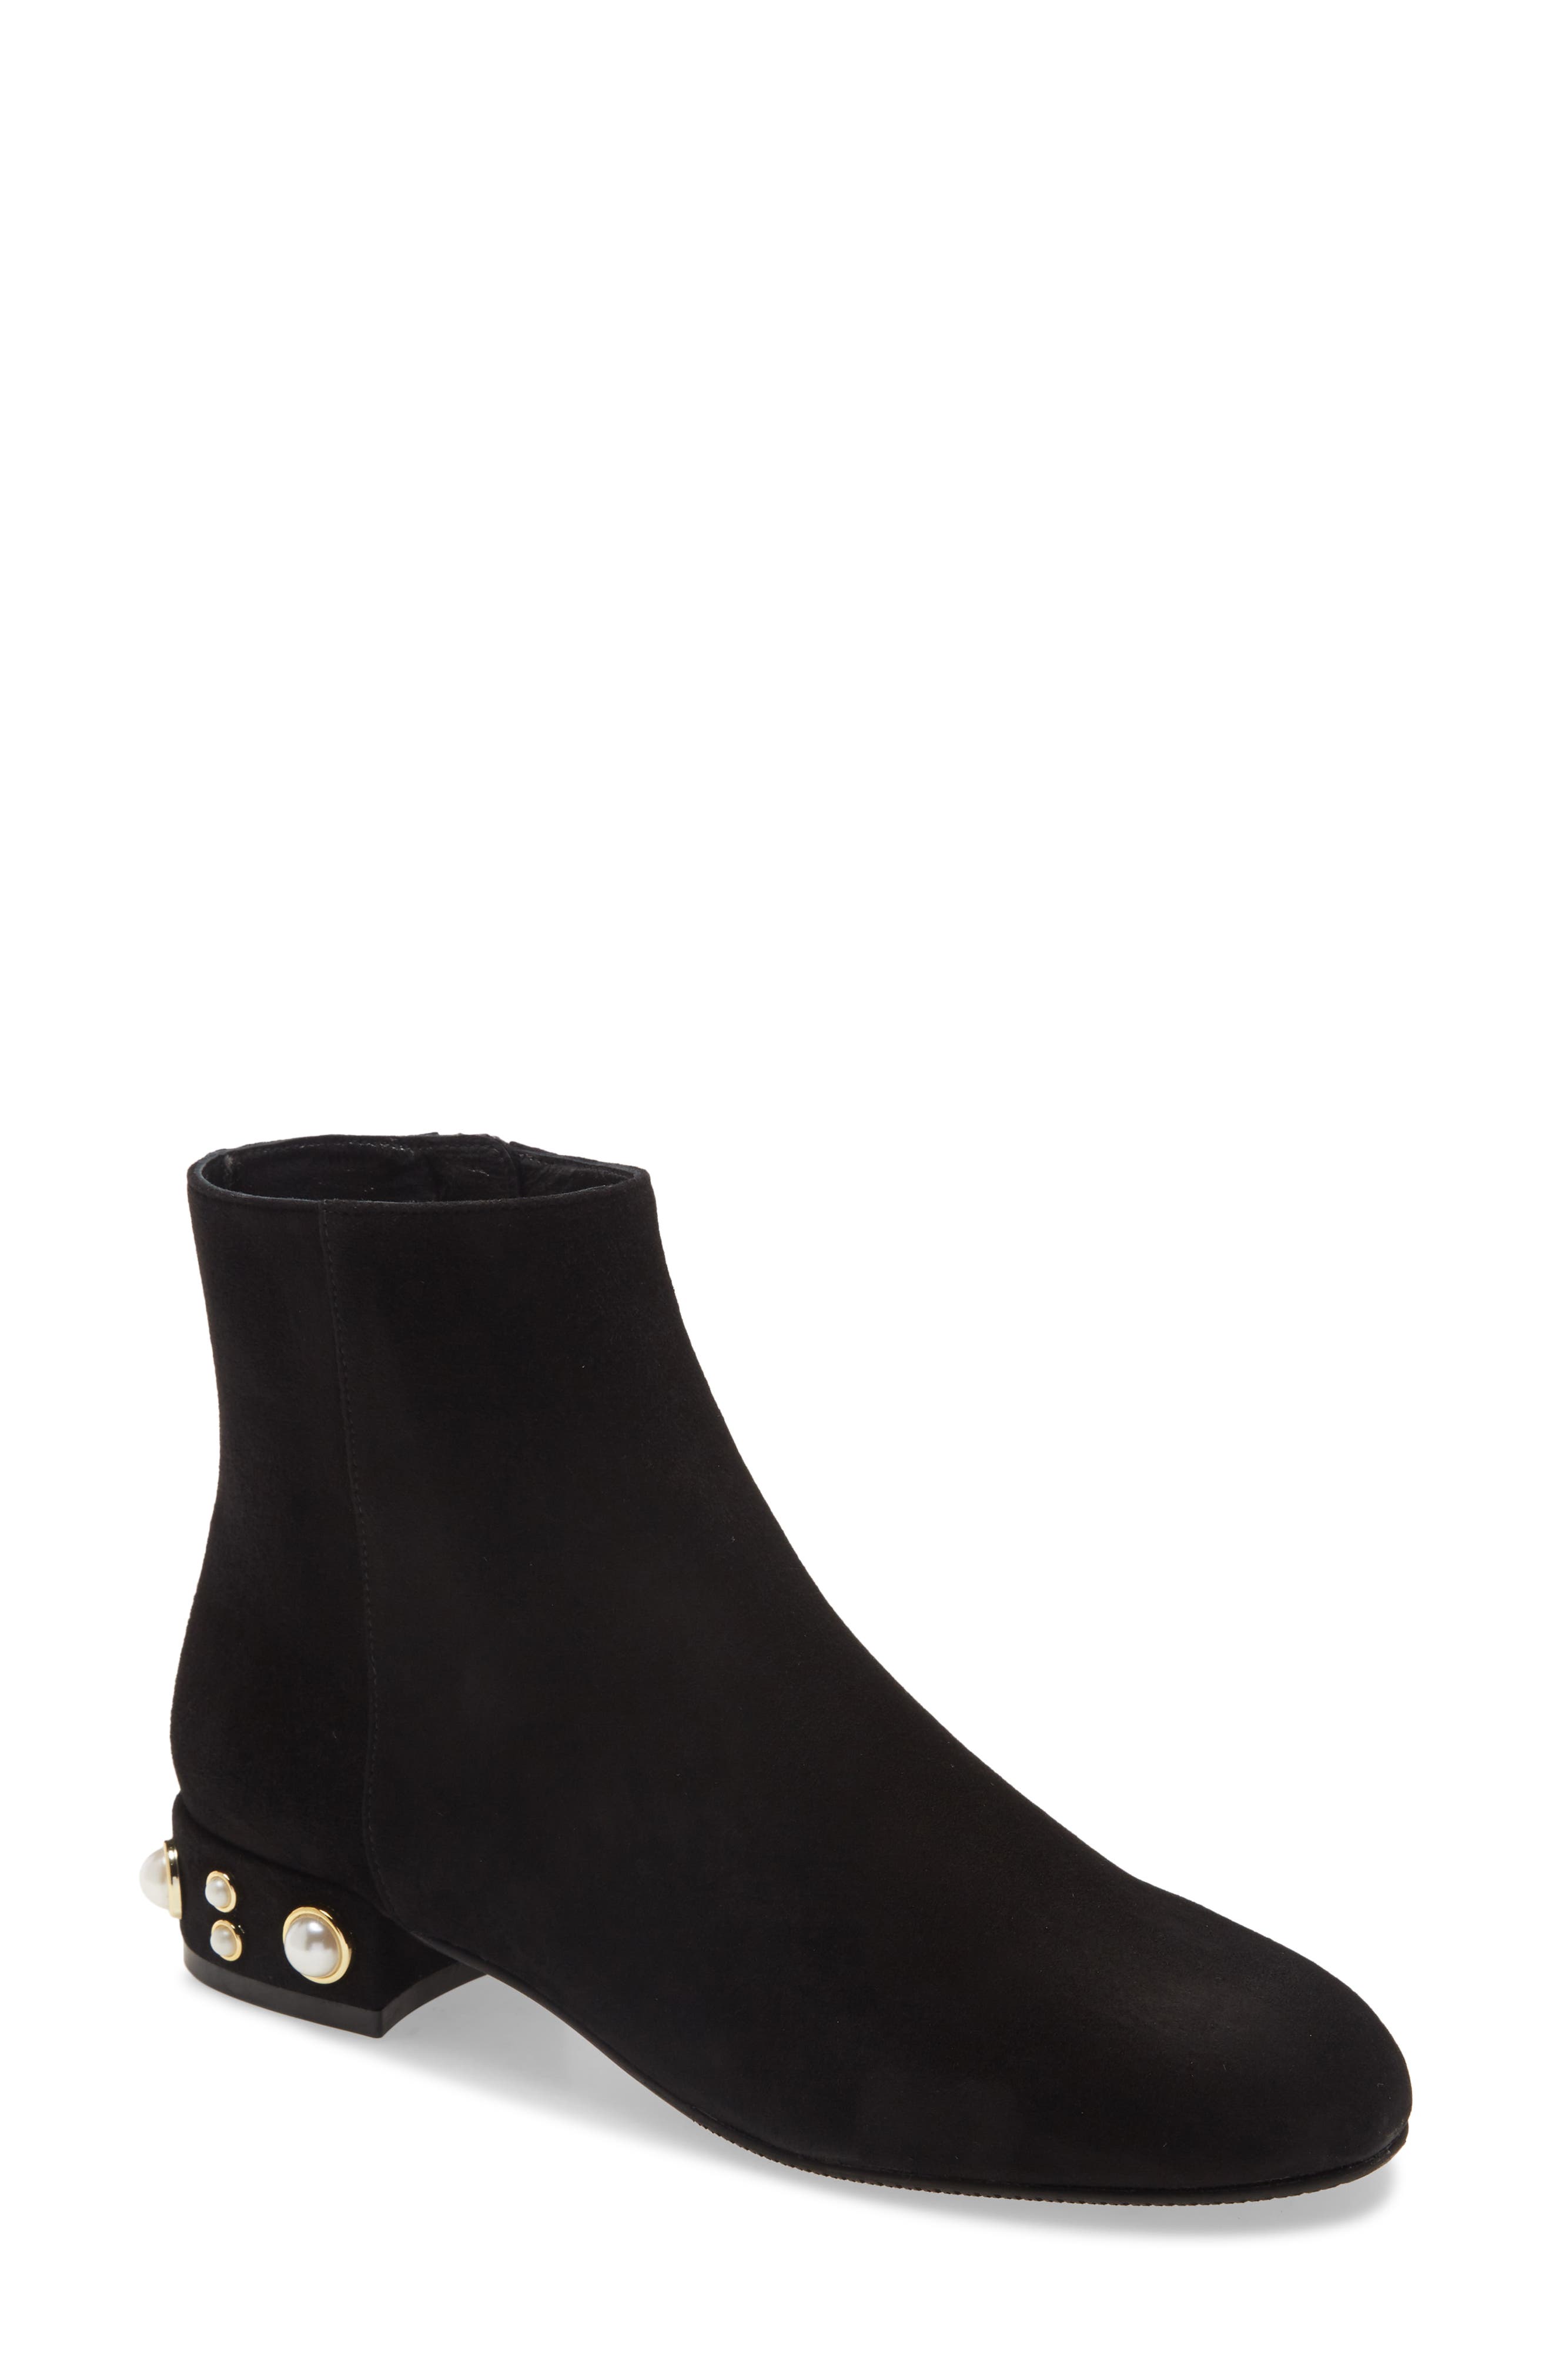 stuart weitzman boots with pearls